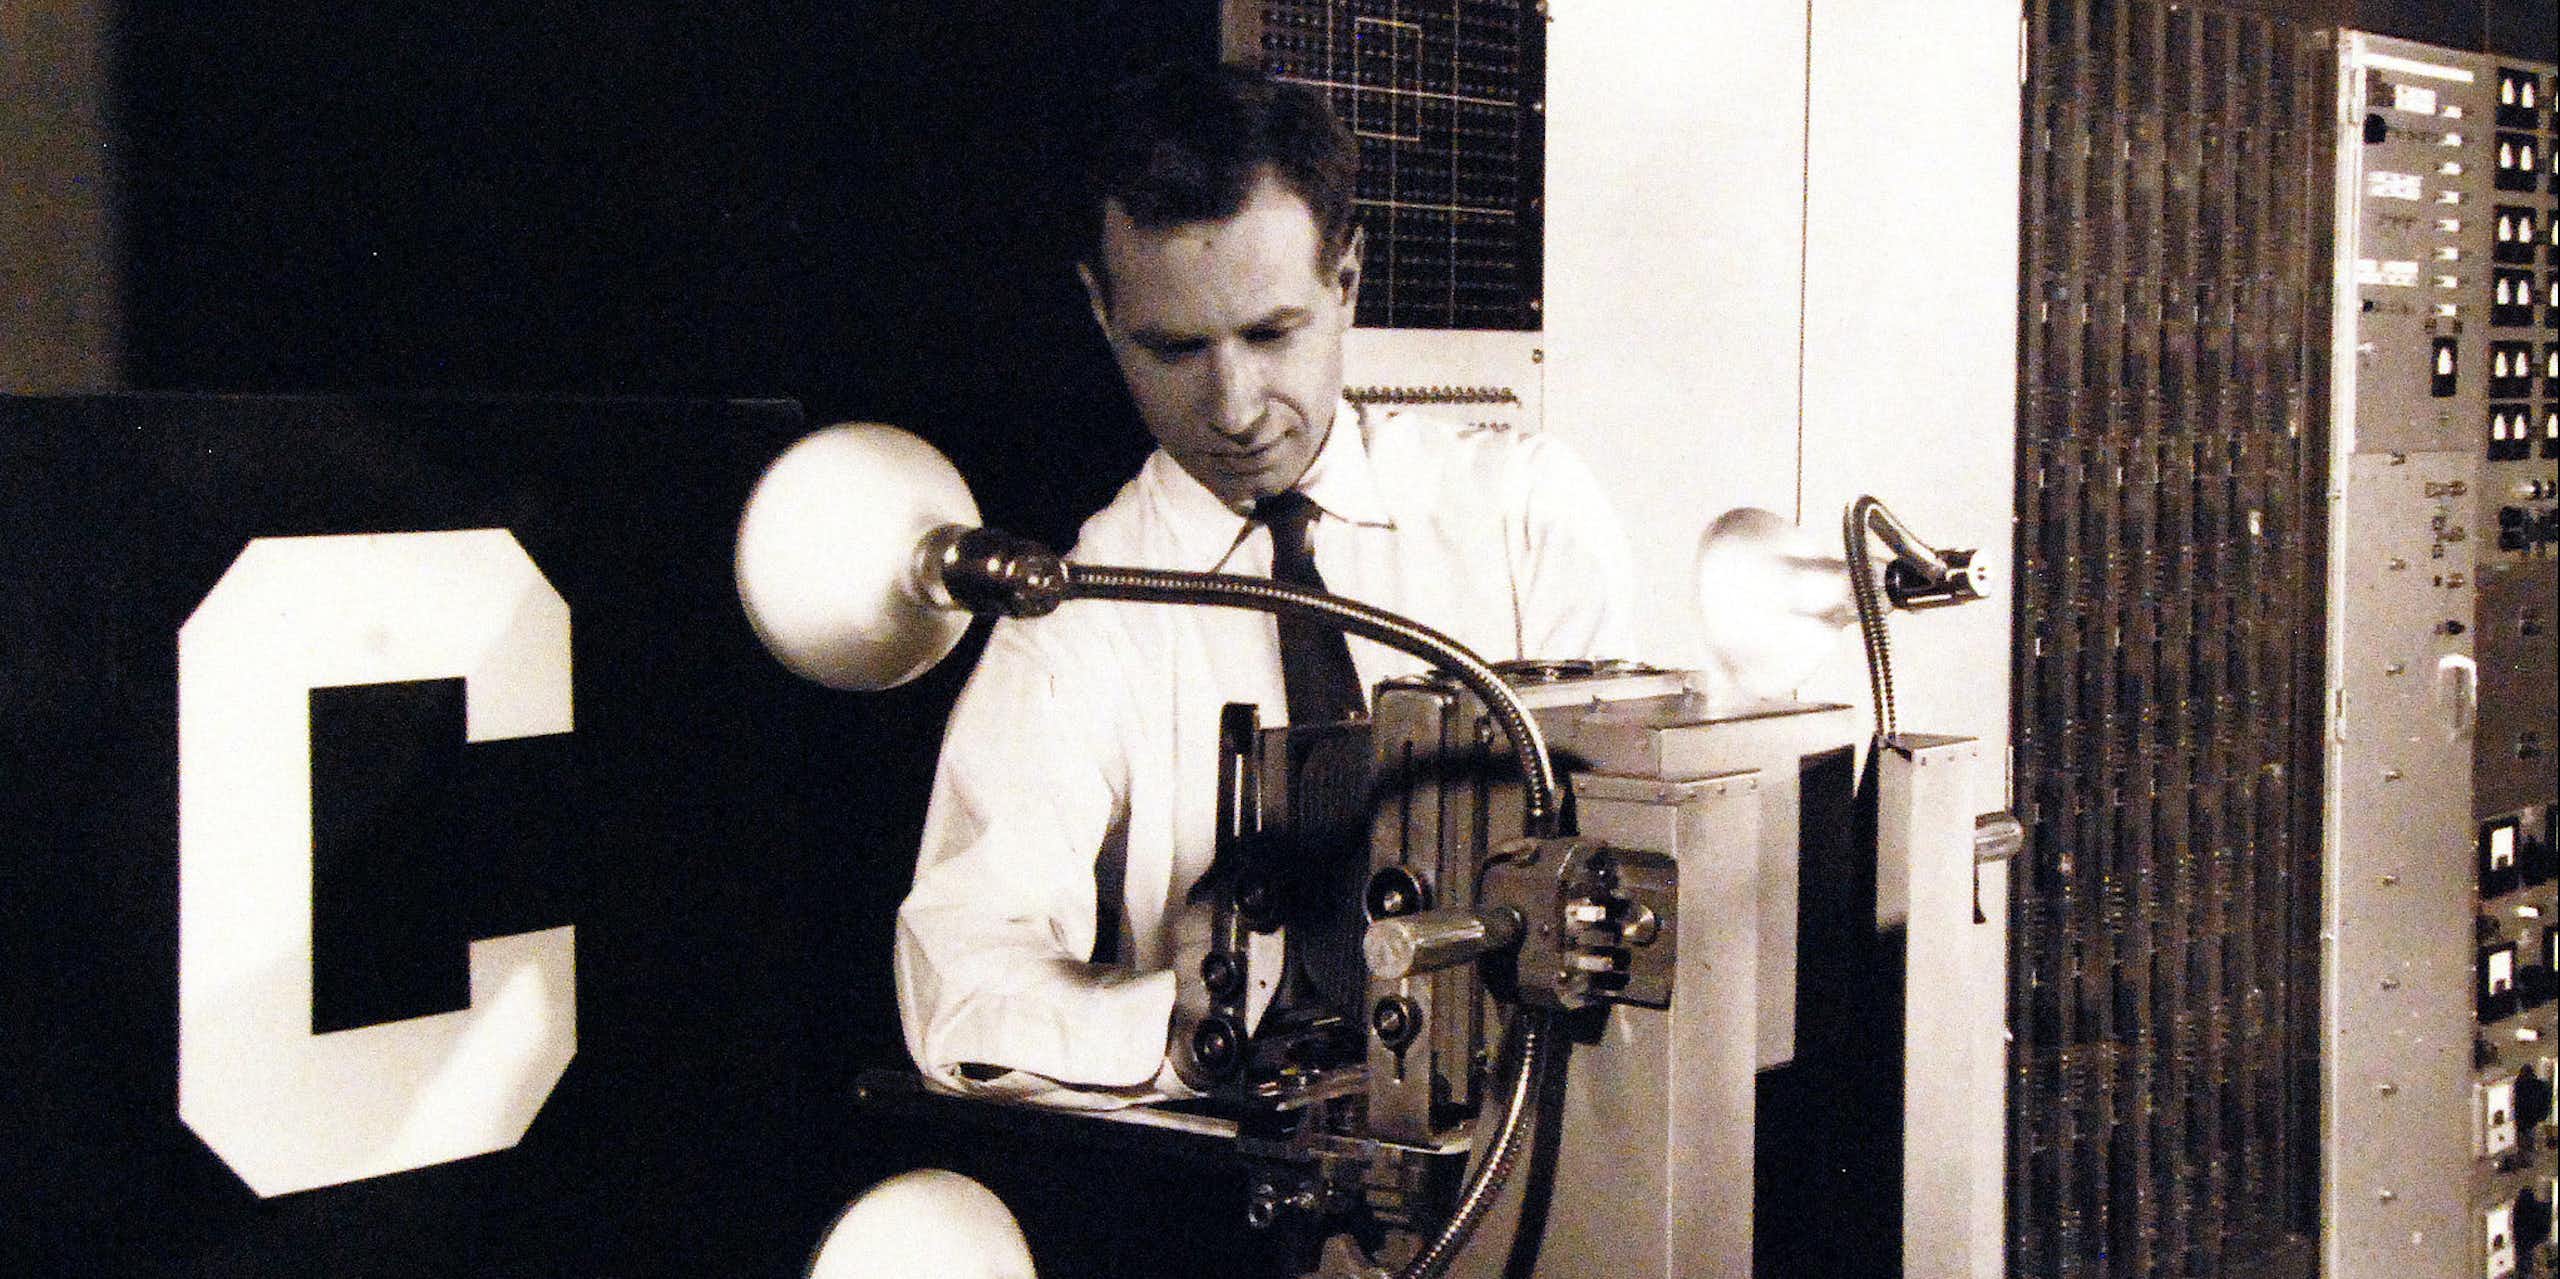 Black and white photo of a man wearing a shirt and tie standing behind a machine with two large lightbulb-like objects on flexible rods attached to its side